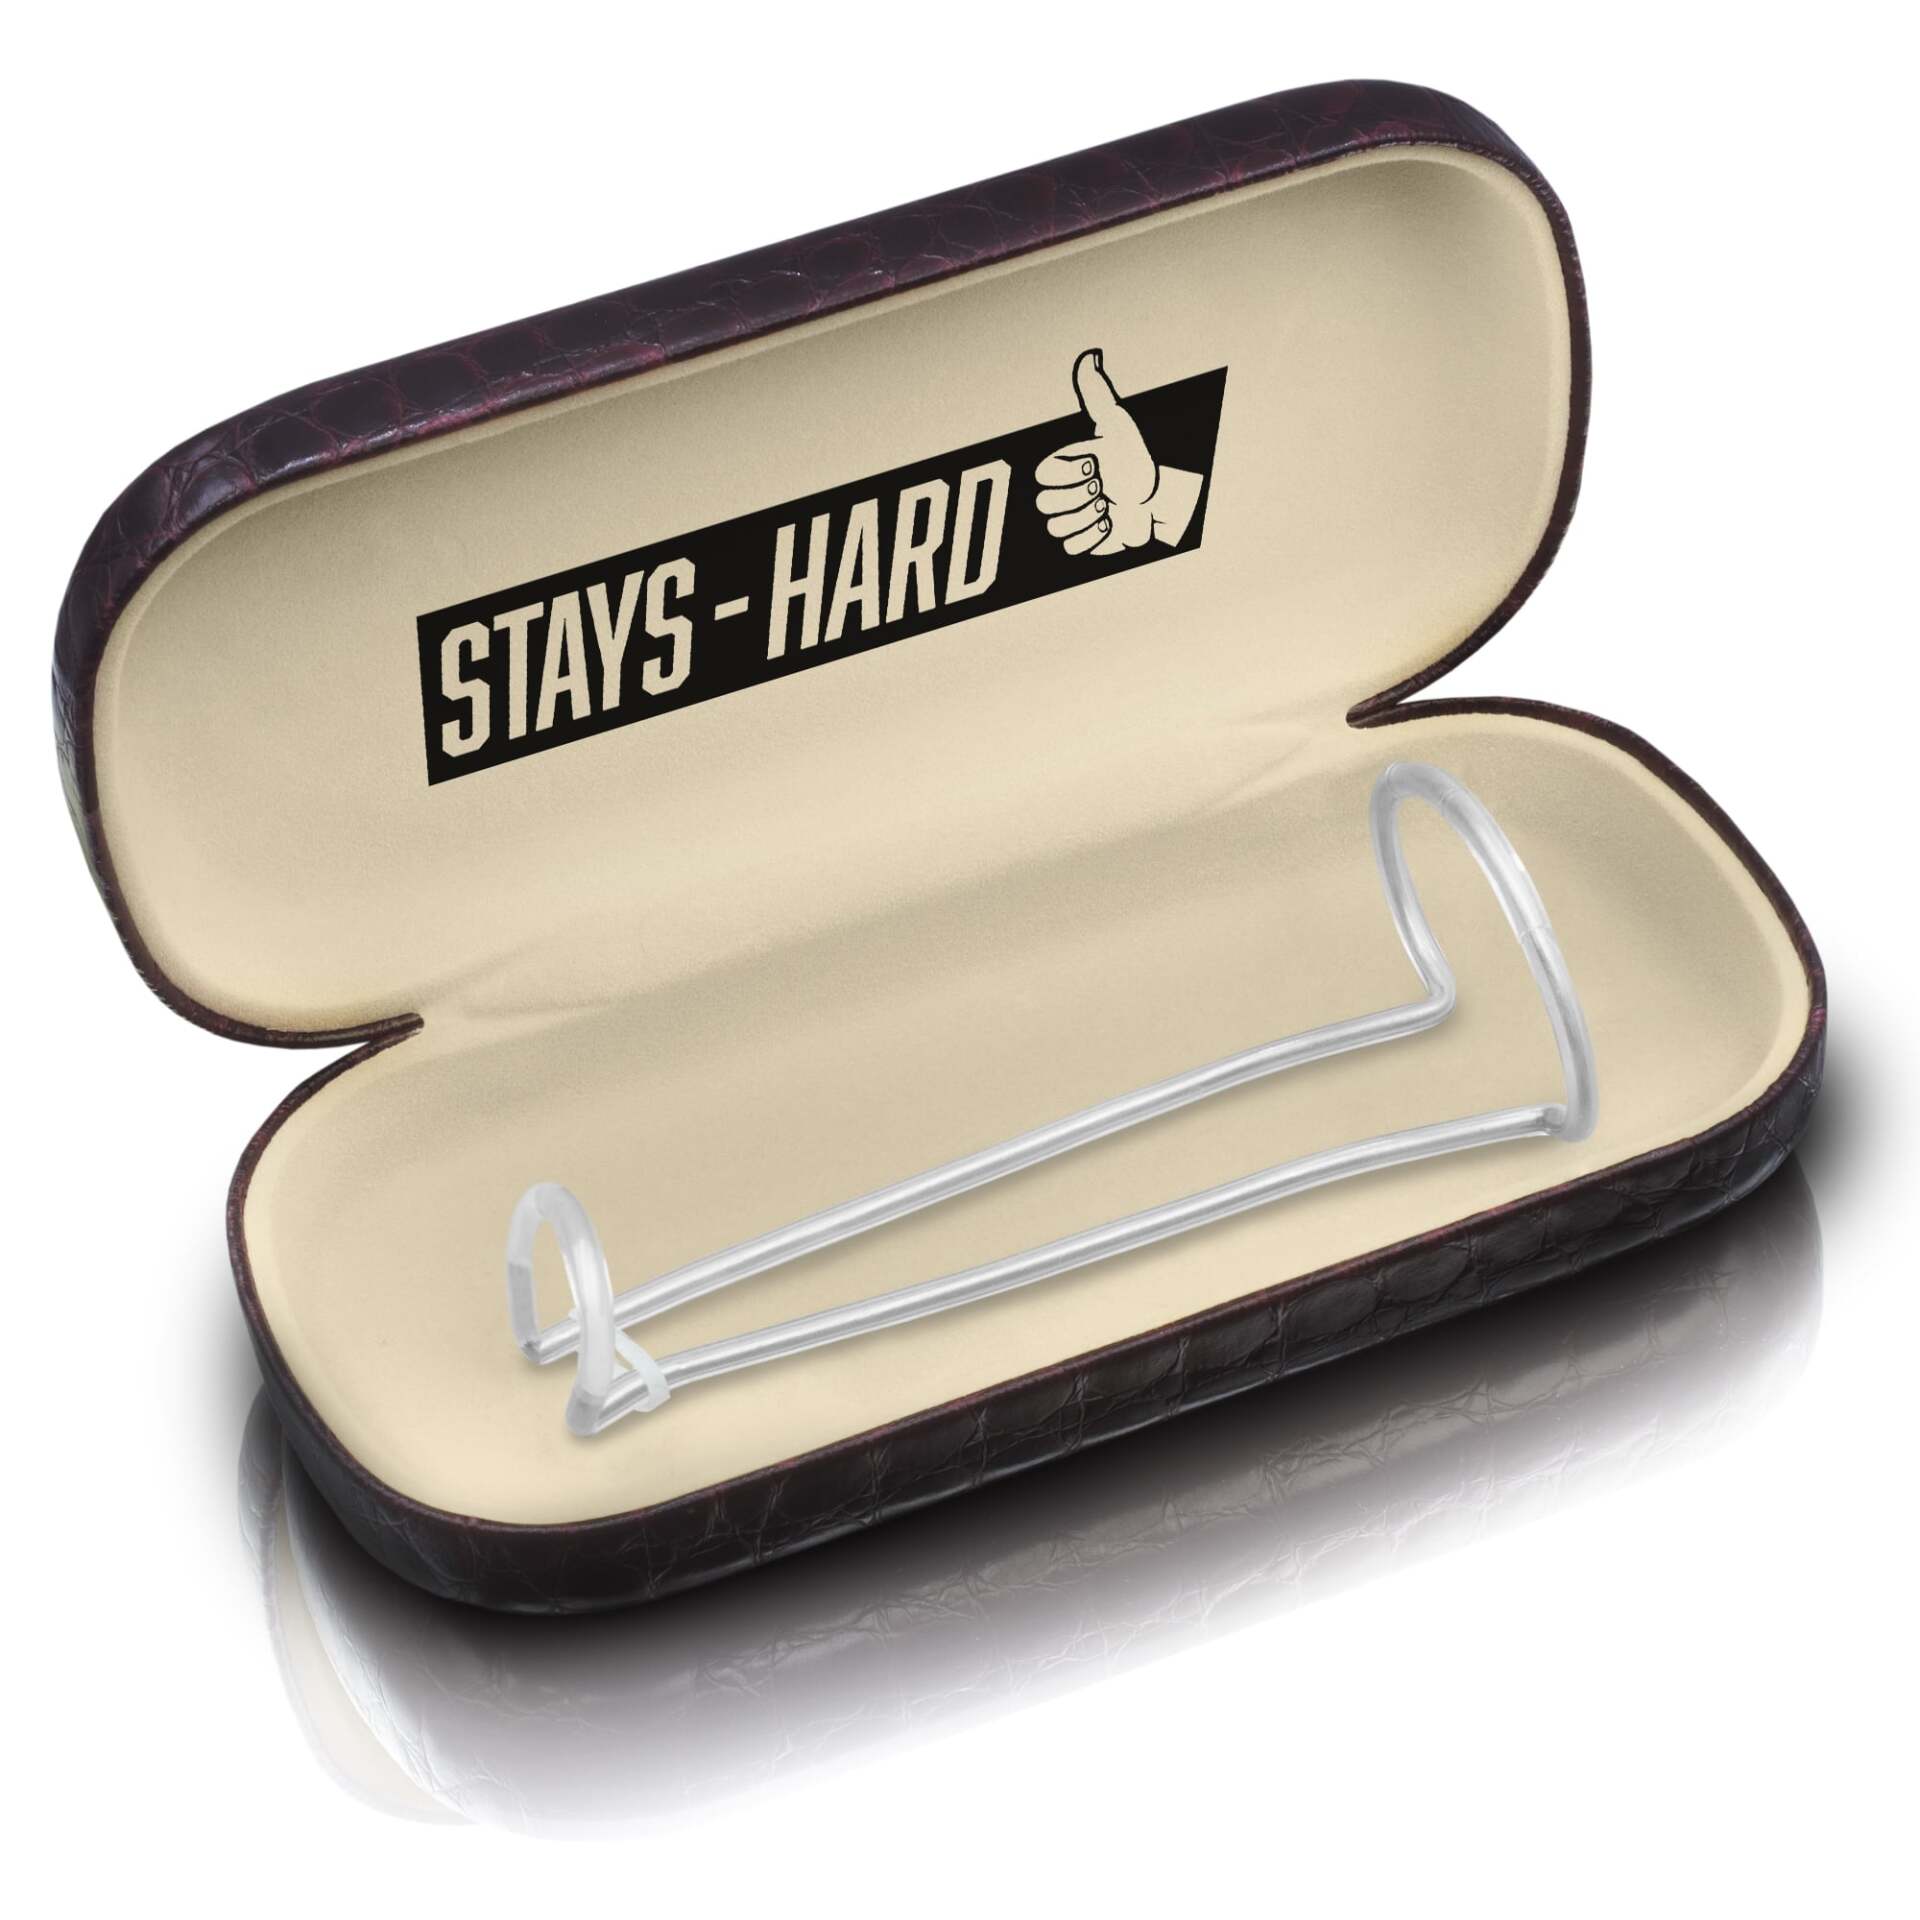 Stays-Hard Device in Case